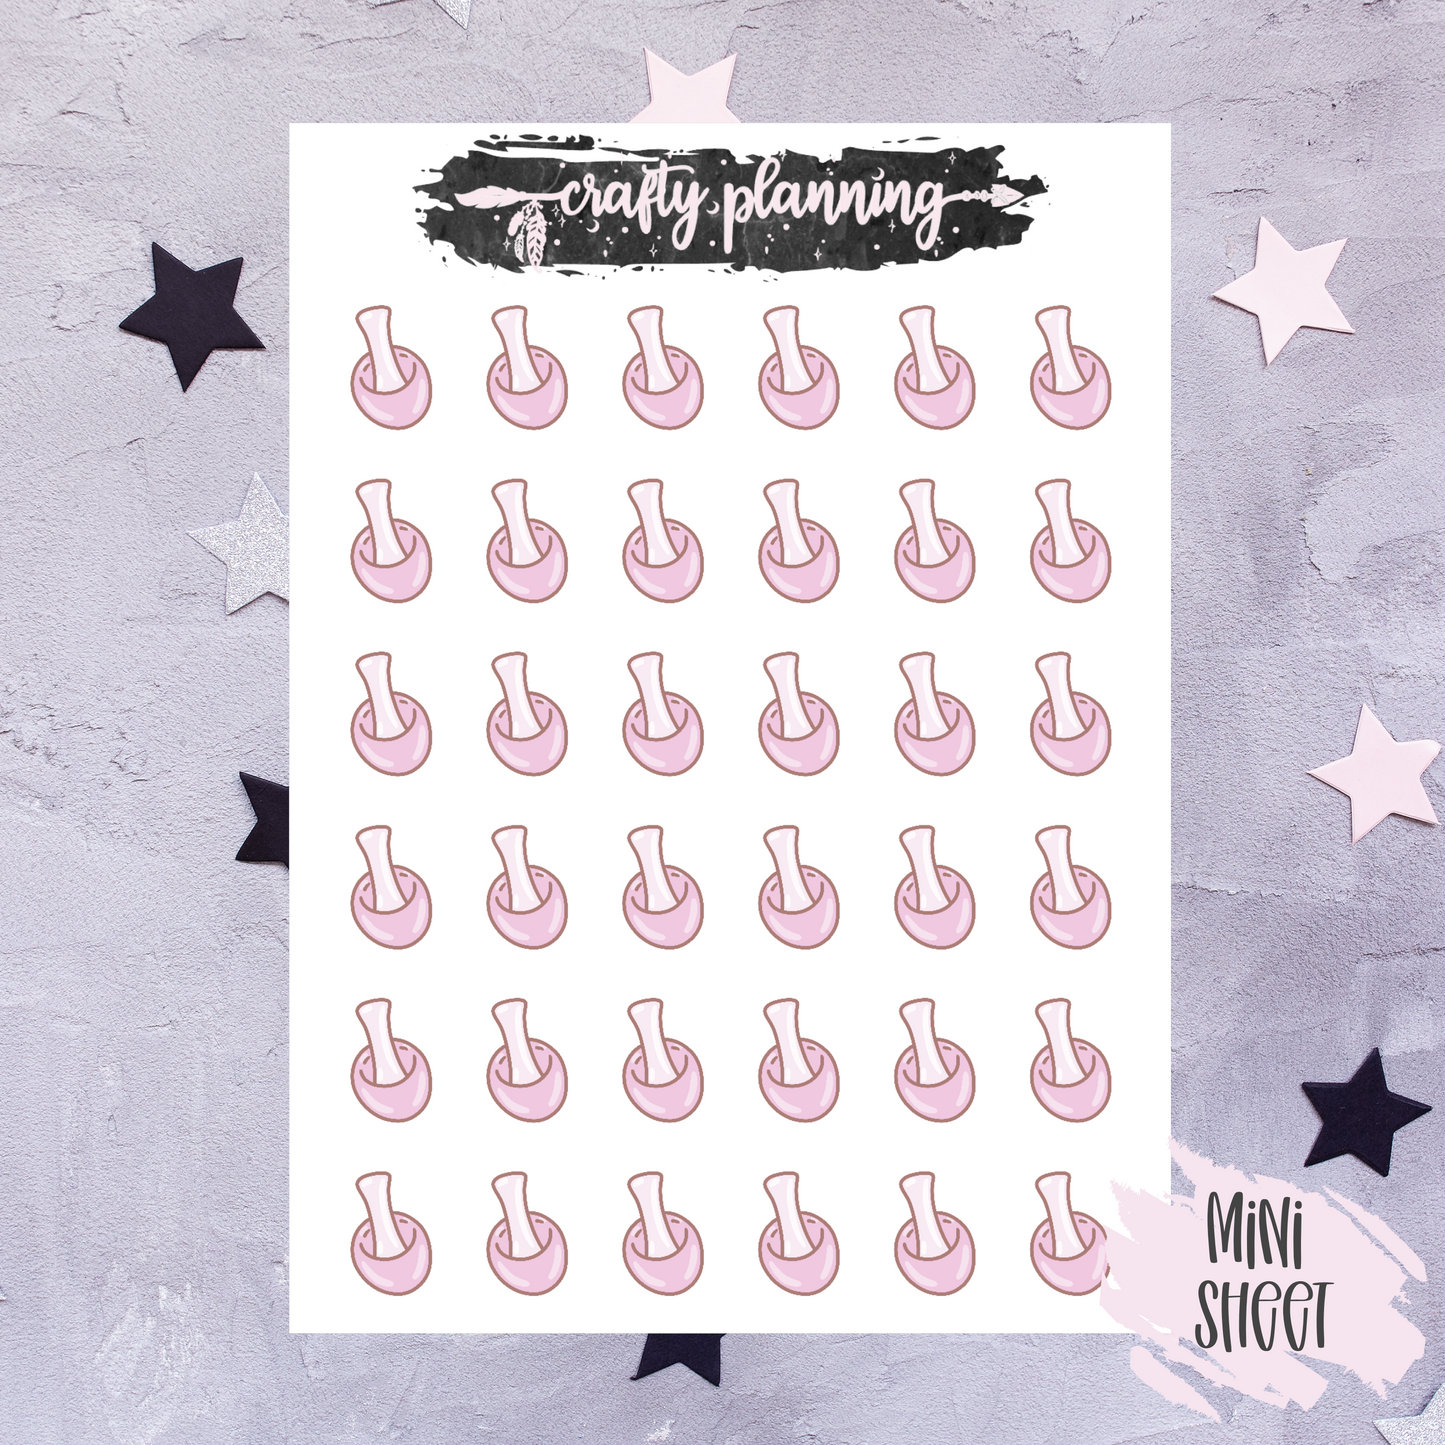 Pestle & Mortar Stickers, Pink Witch Stickers, Doodle Stickers, Witchcraft Stickers, Witch Functional, Witch Planner Stickers